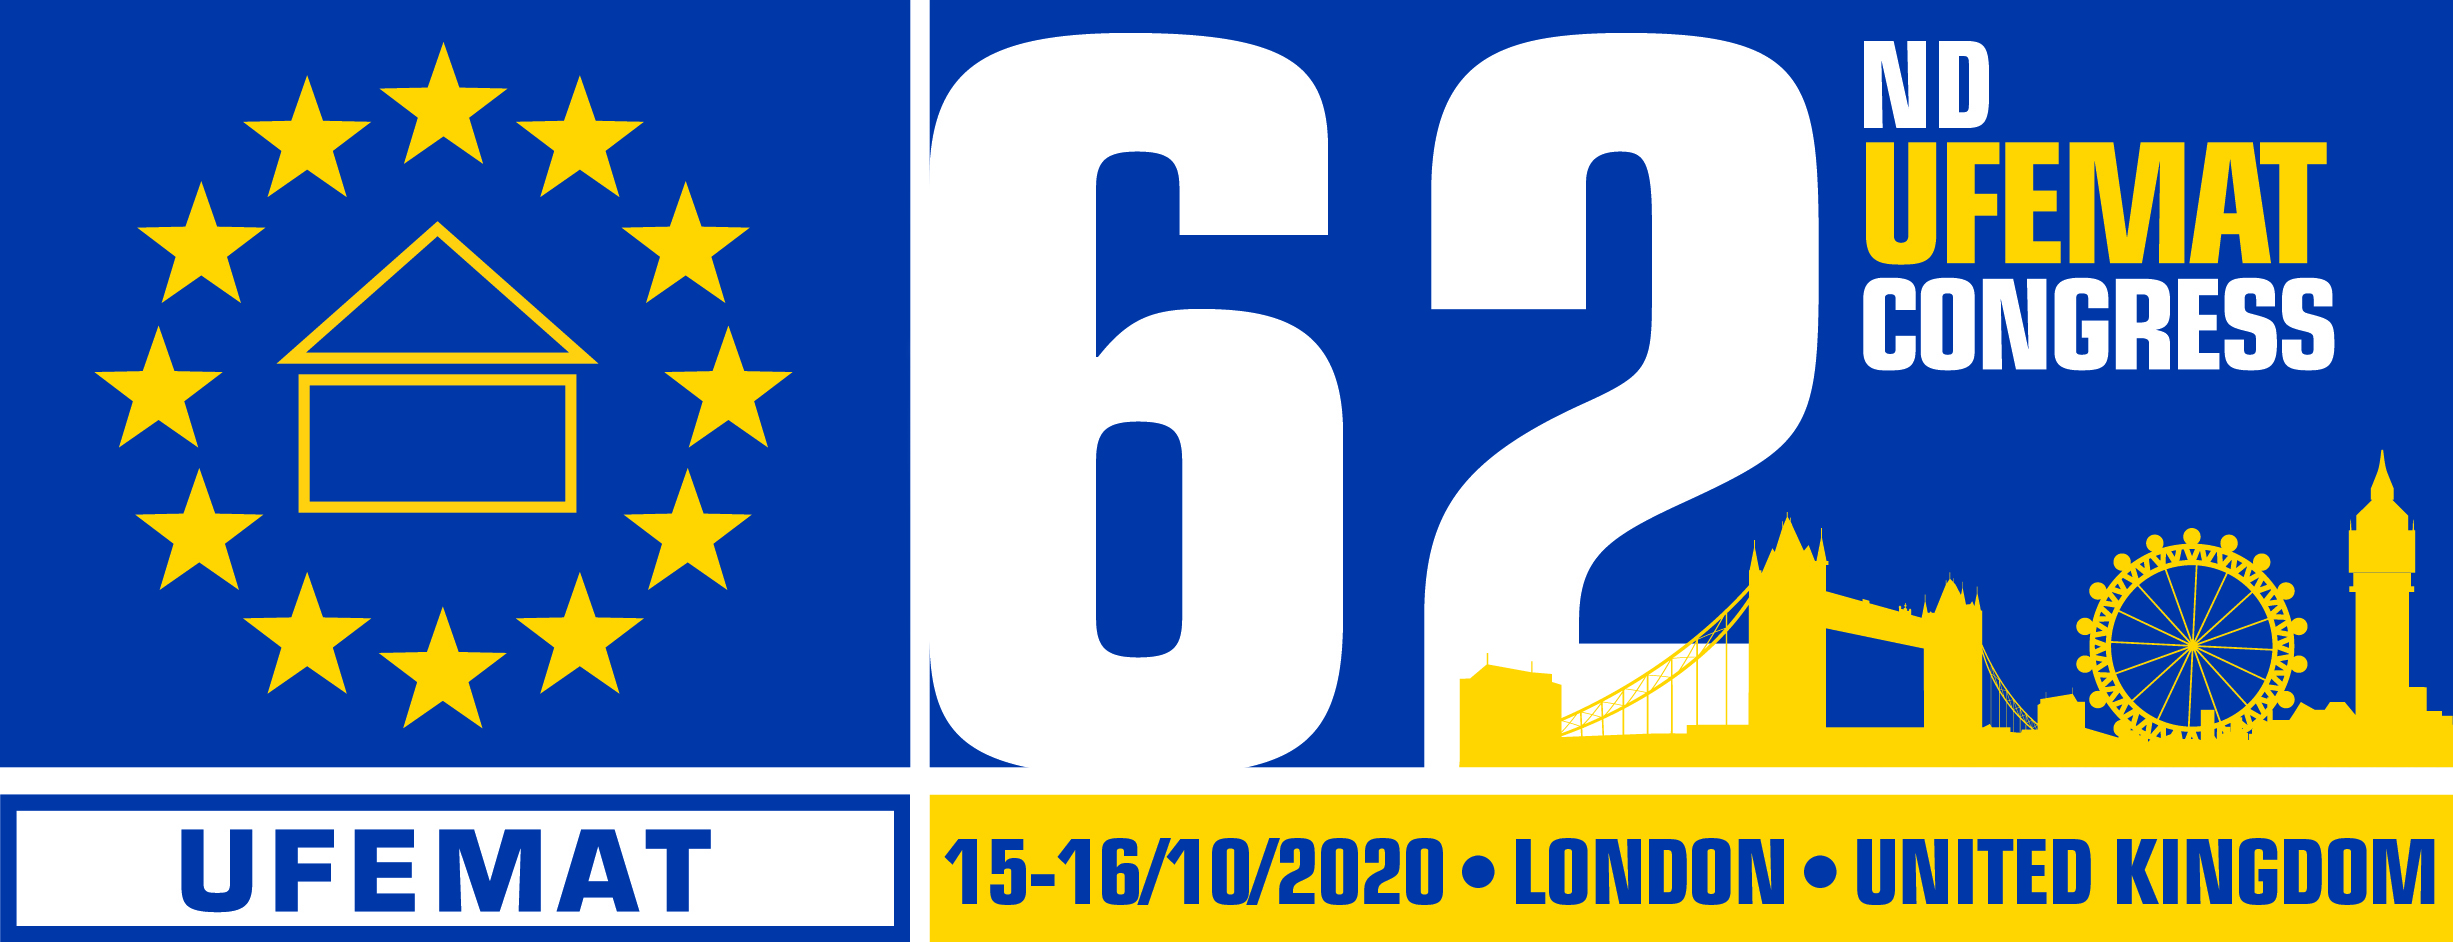 POSTPONED - Ufemat Conference 2020 - London